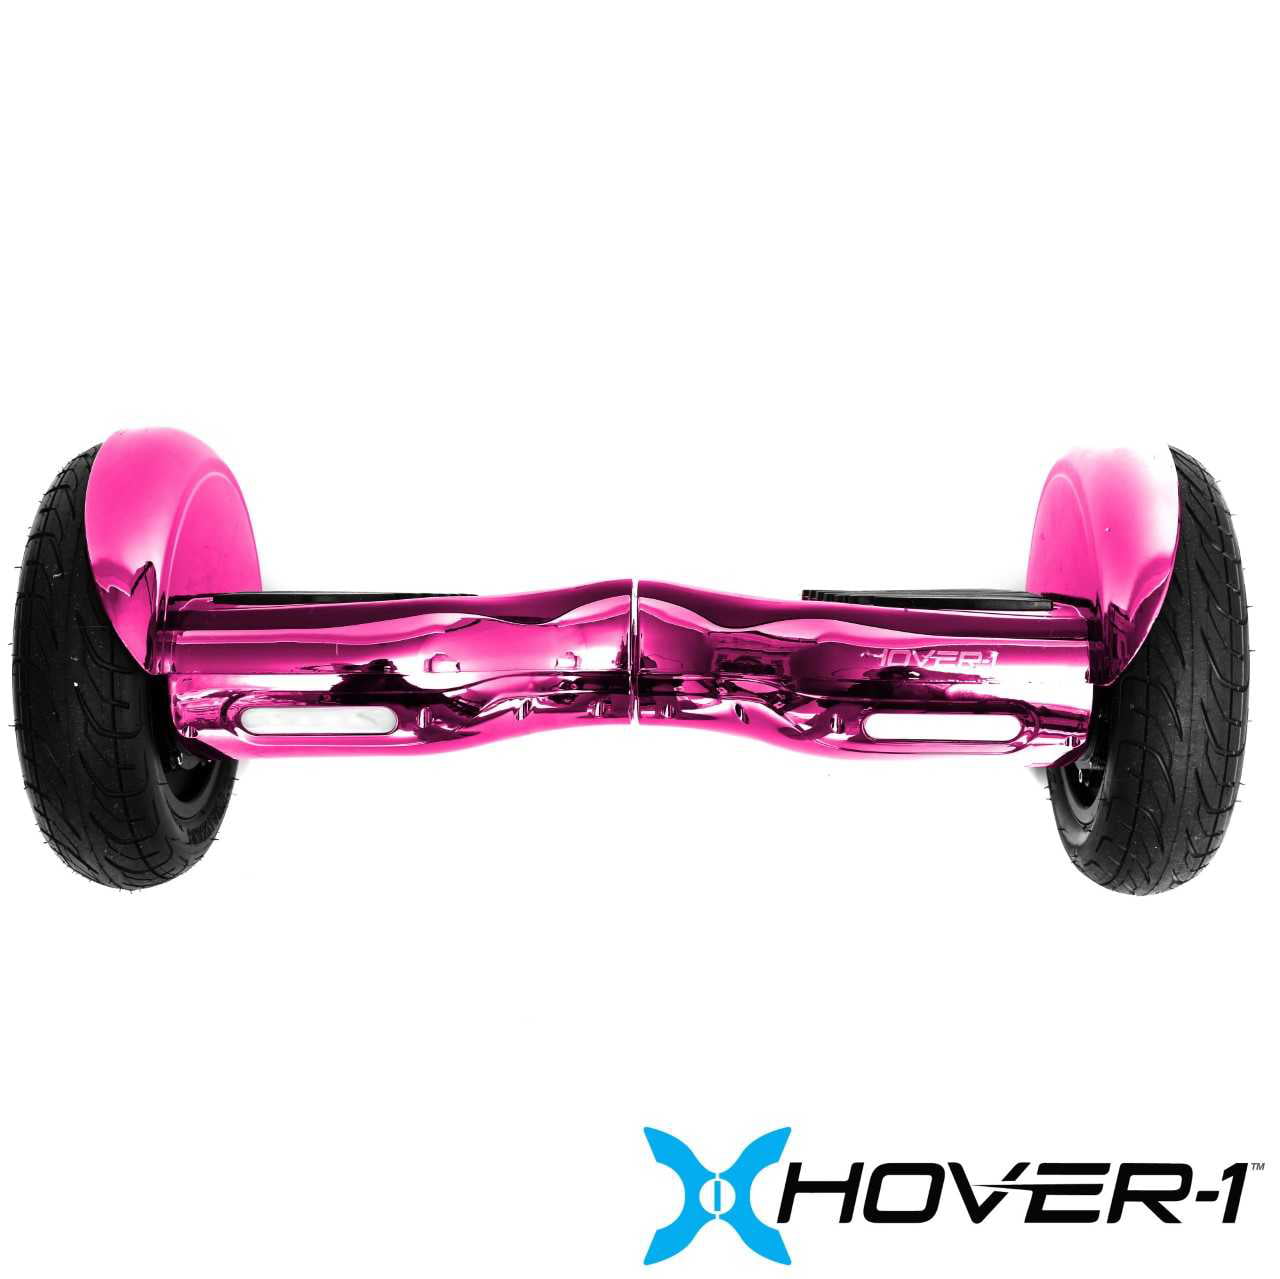 Hover 1